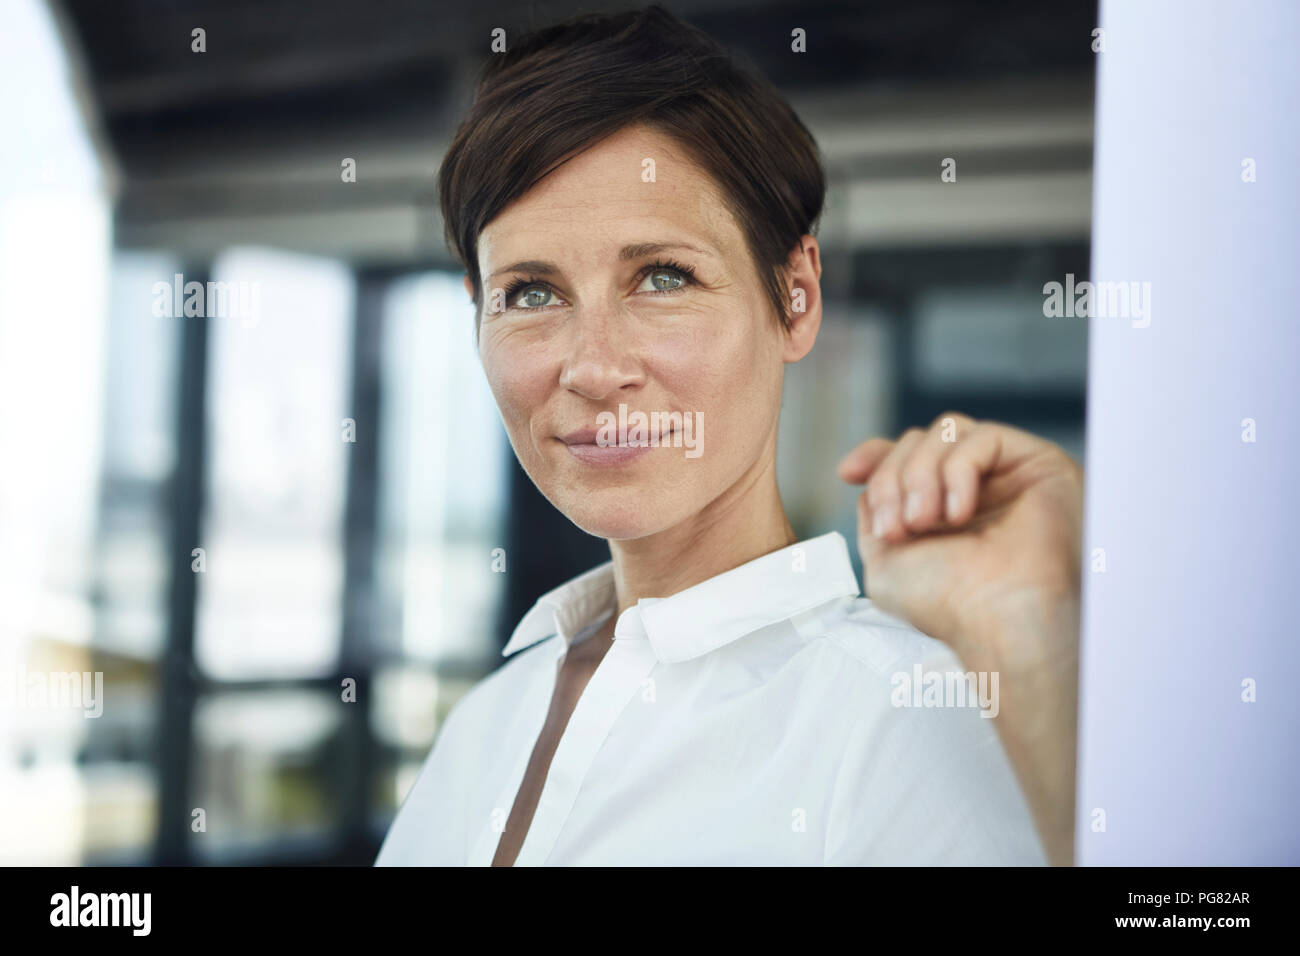 Portrait of smiling businesswoman in office looking out of window Stock Photo